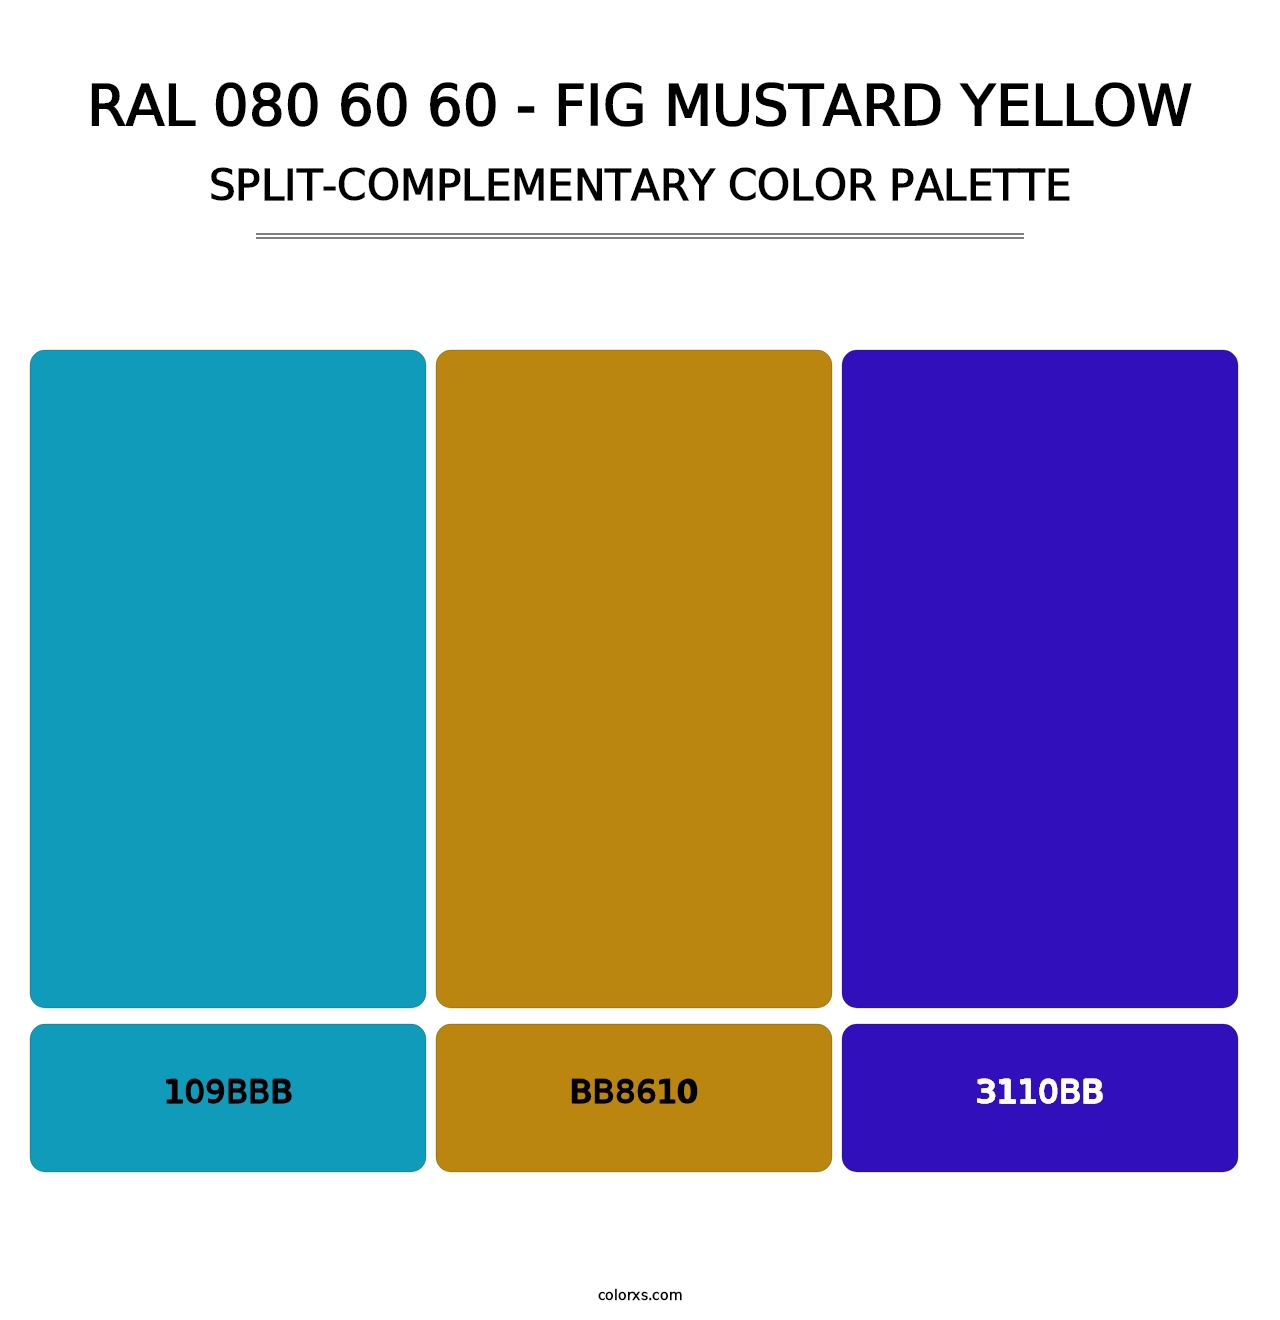 RAL 080 60 60 - Fig Mustard Yellow - Split-Complementary Color Palette